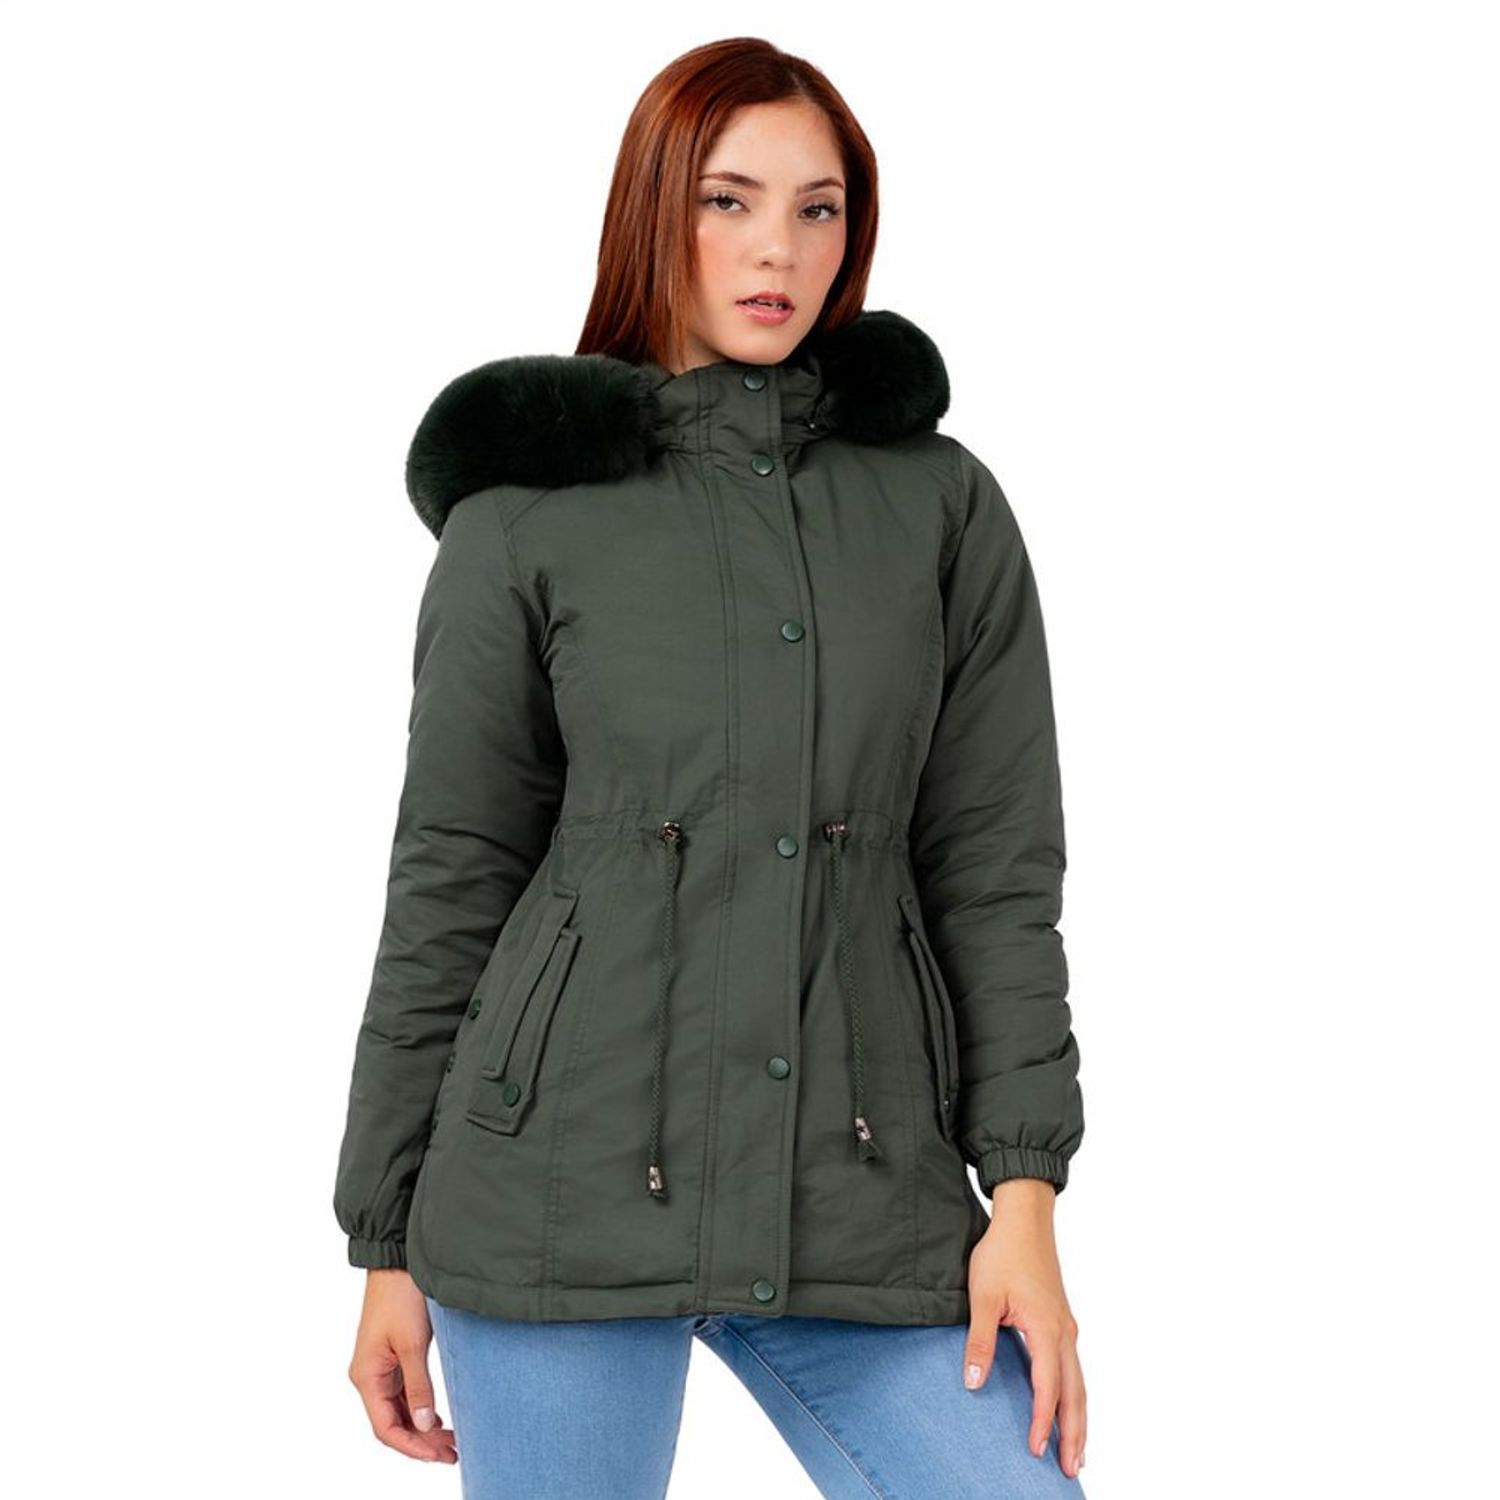 Campera Parka Reversible Mujer by Indra Color Verde con Negro Talla XL I  Oechsle - Oechsle